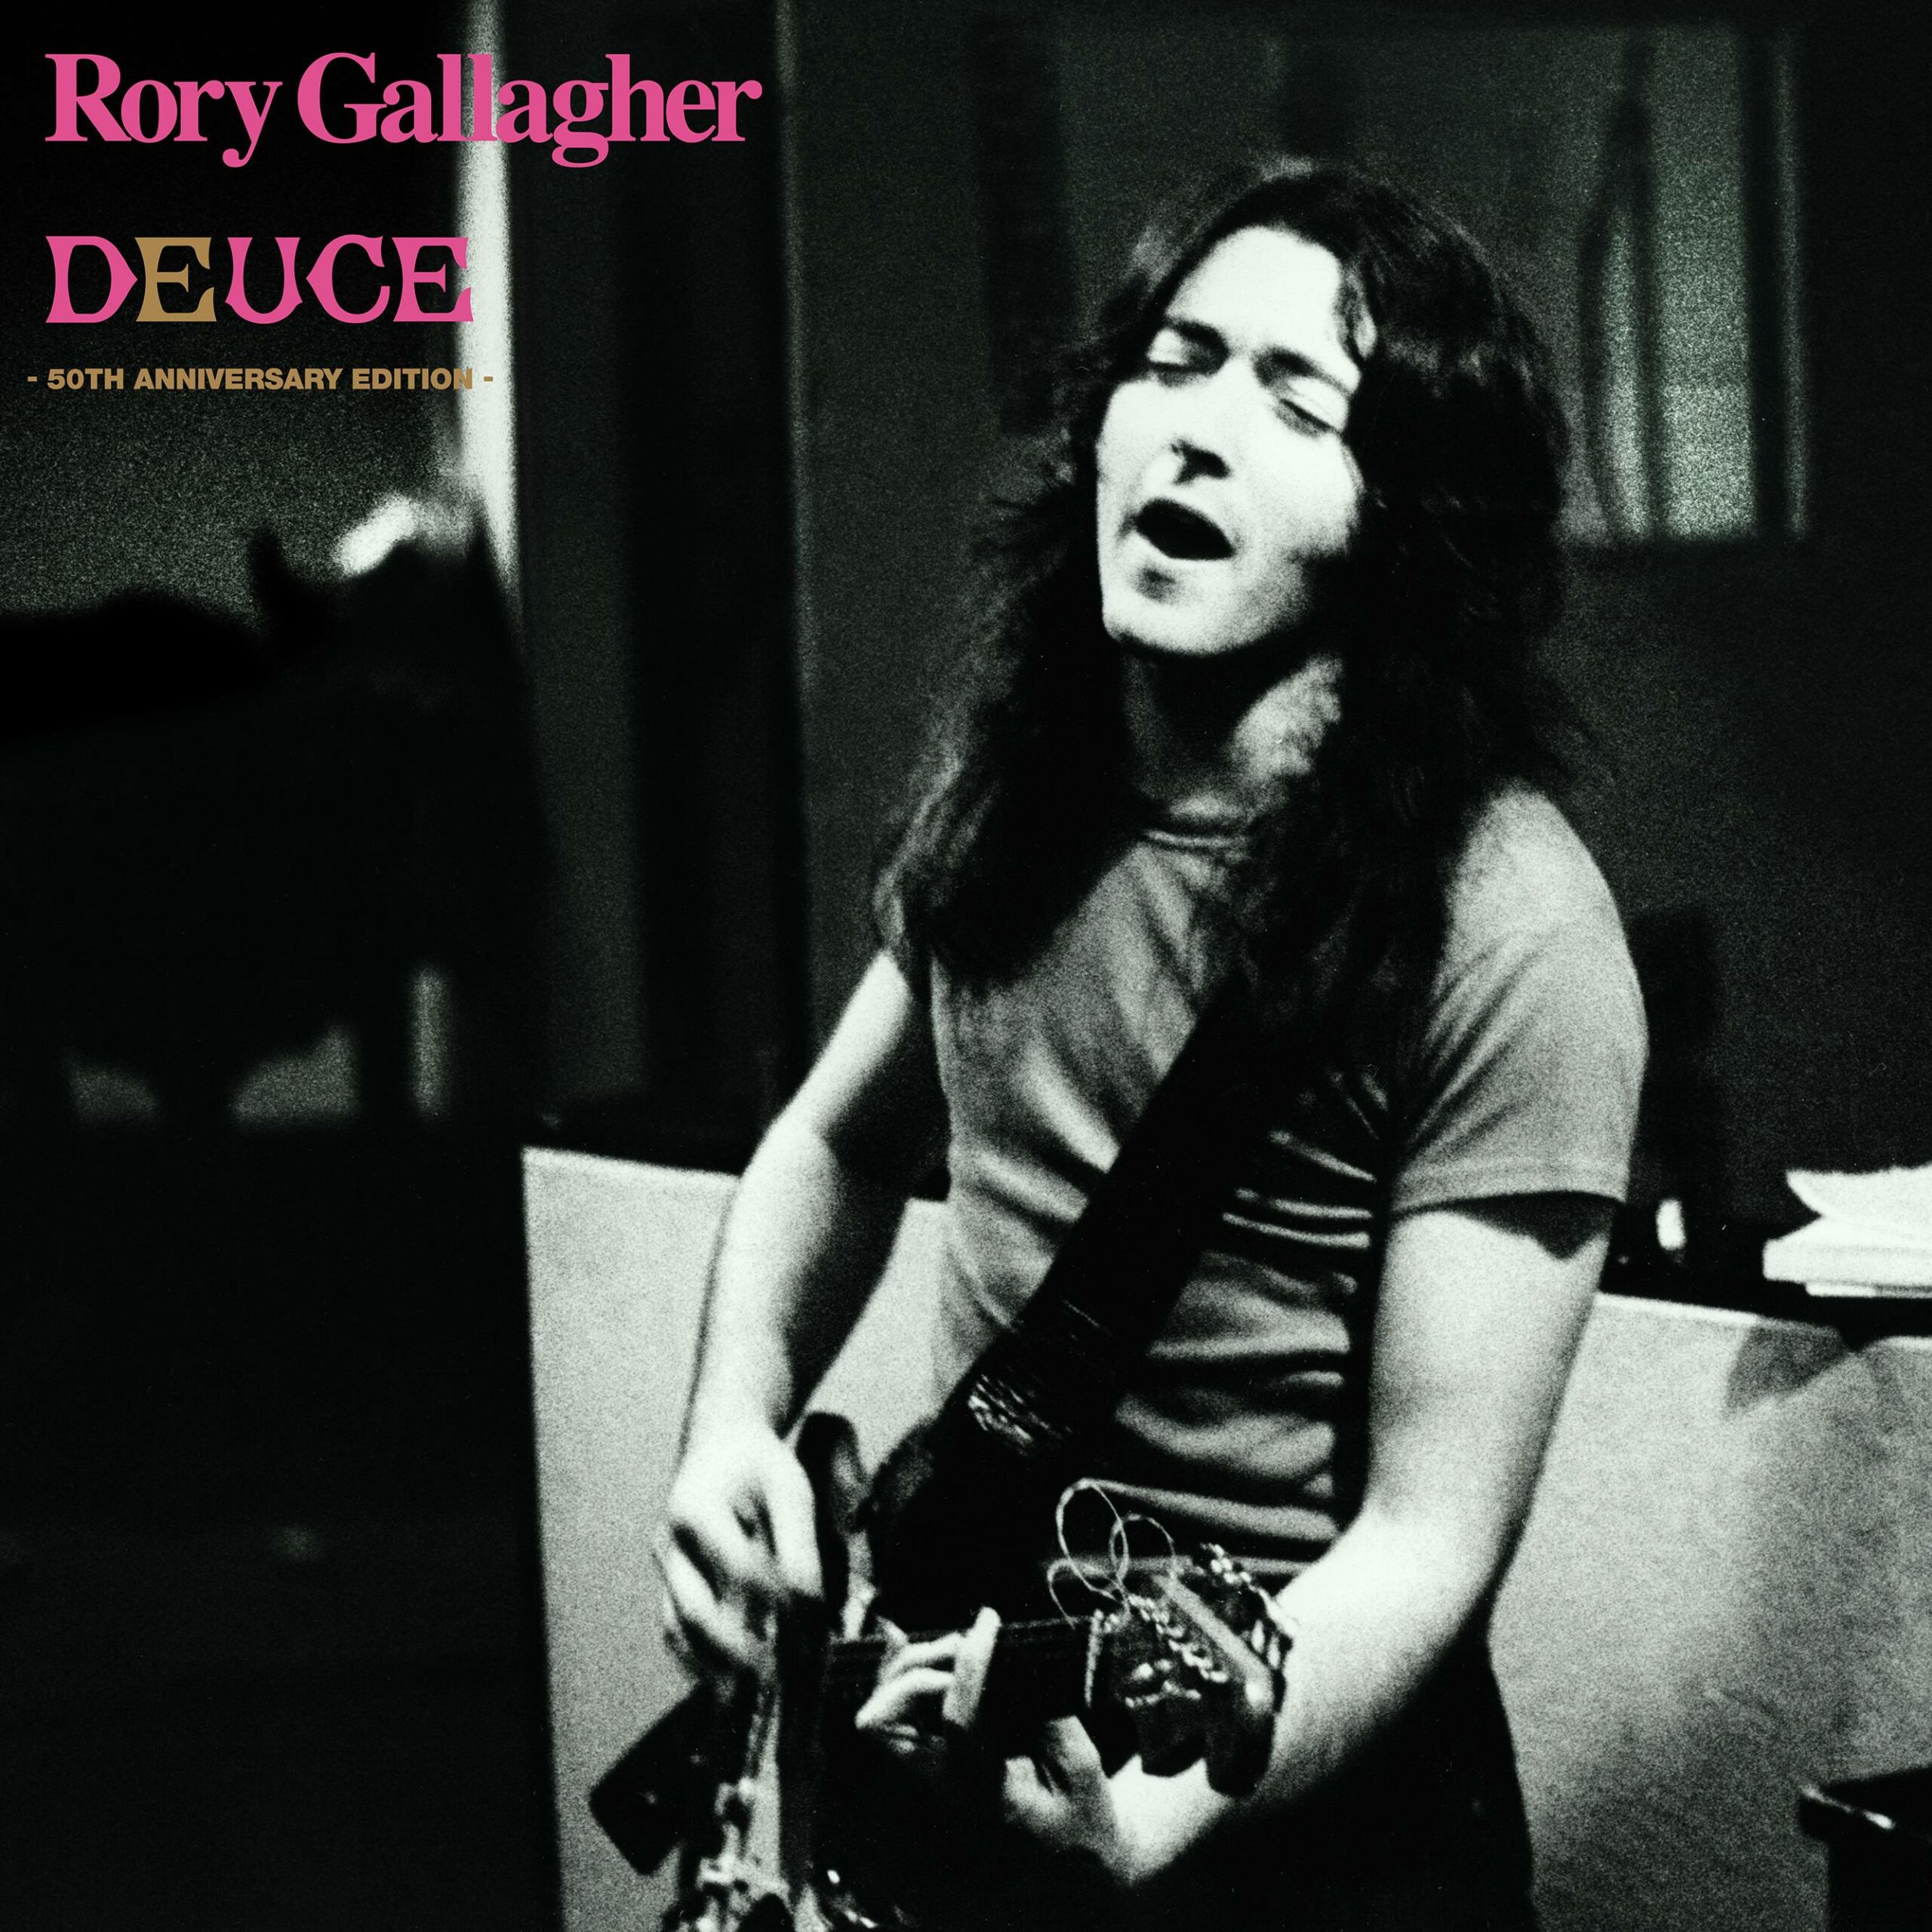 Rory Gallagher (IRE) – Deuce 50th Anniversary Edition